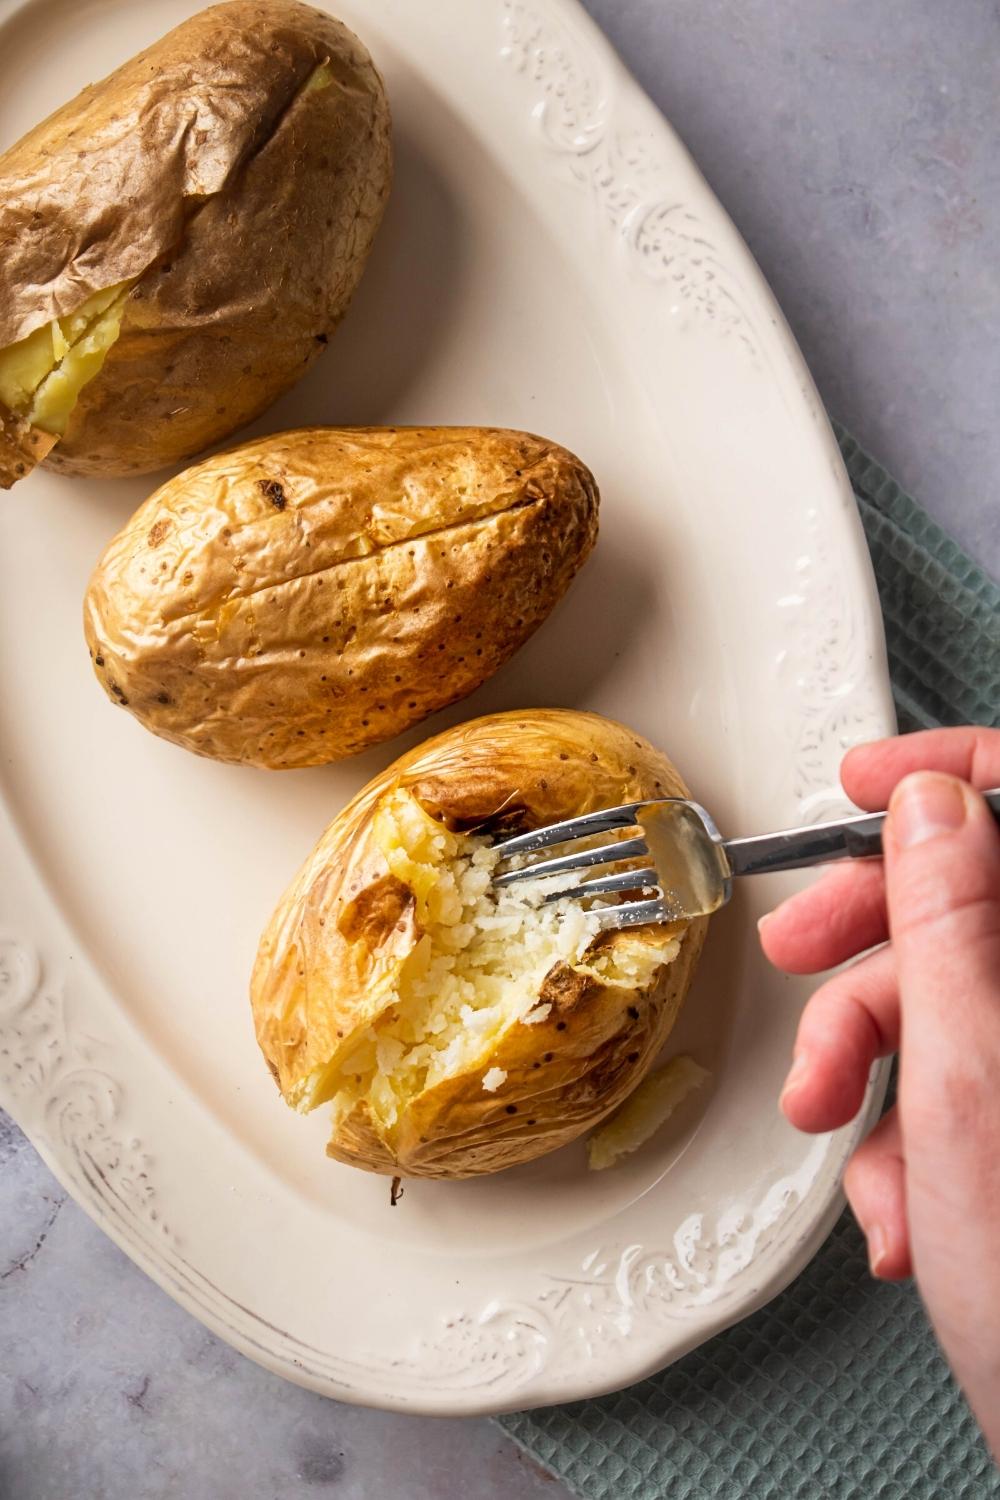 A white plate with three baked potatoes on it. A hand is holding a fork and splitting open the front baked potato.